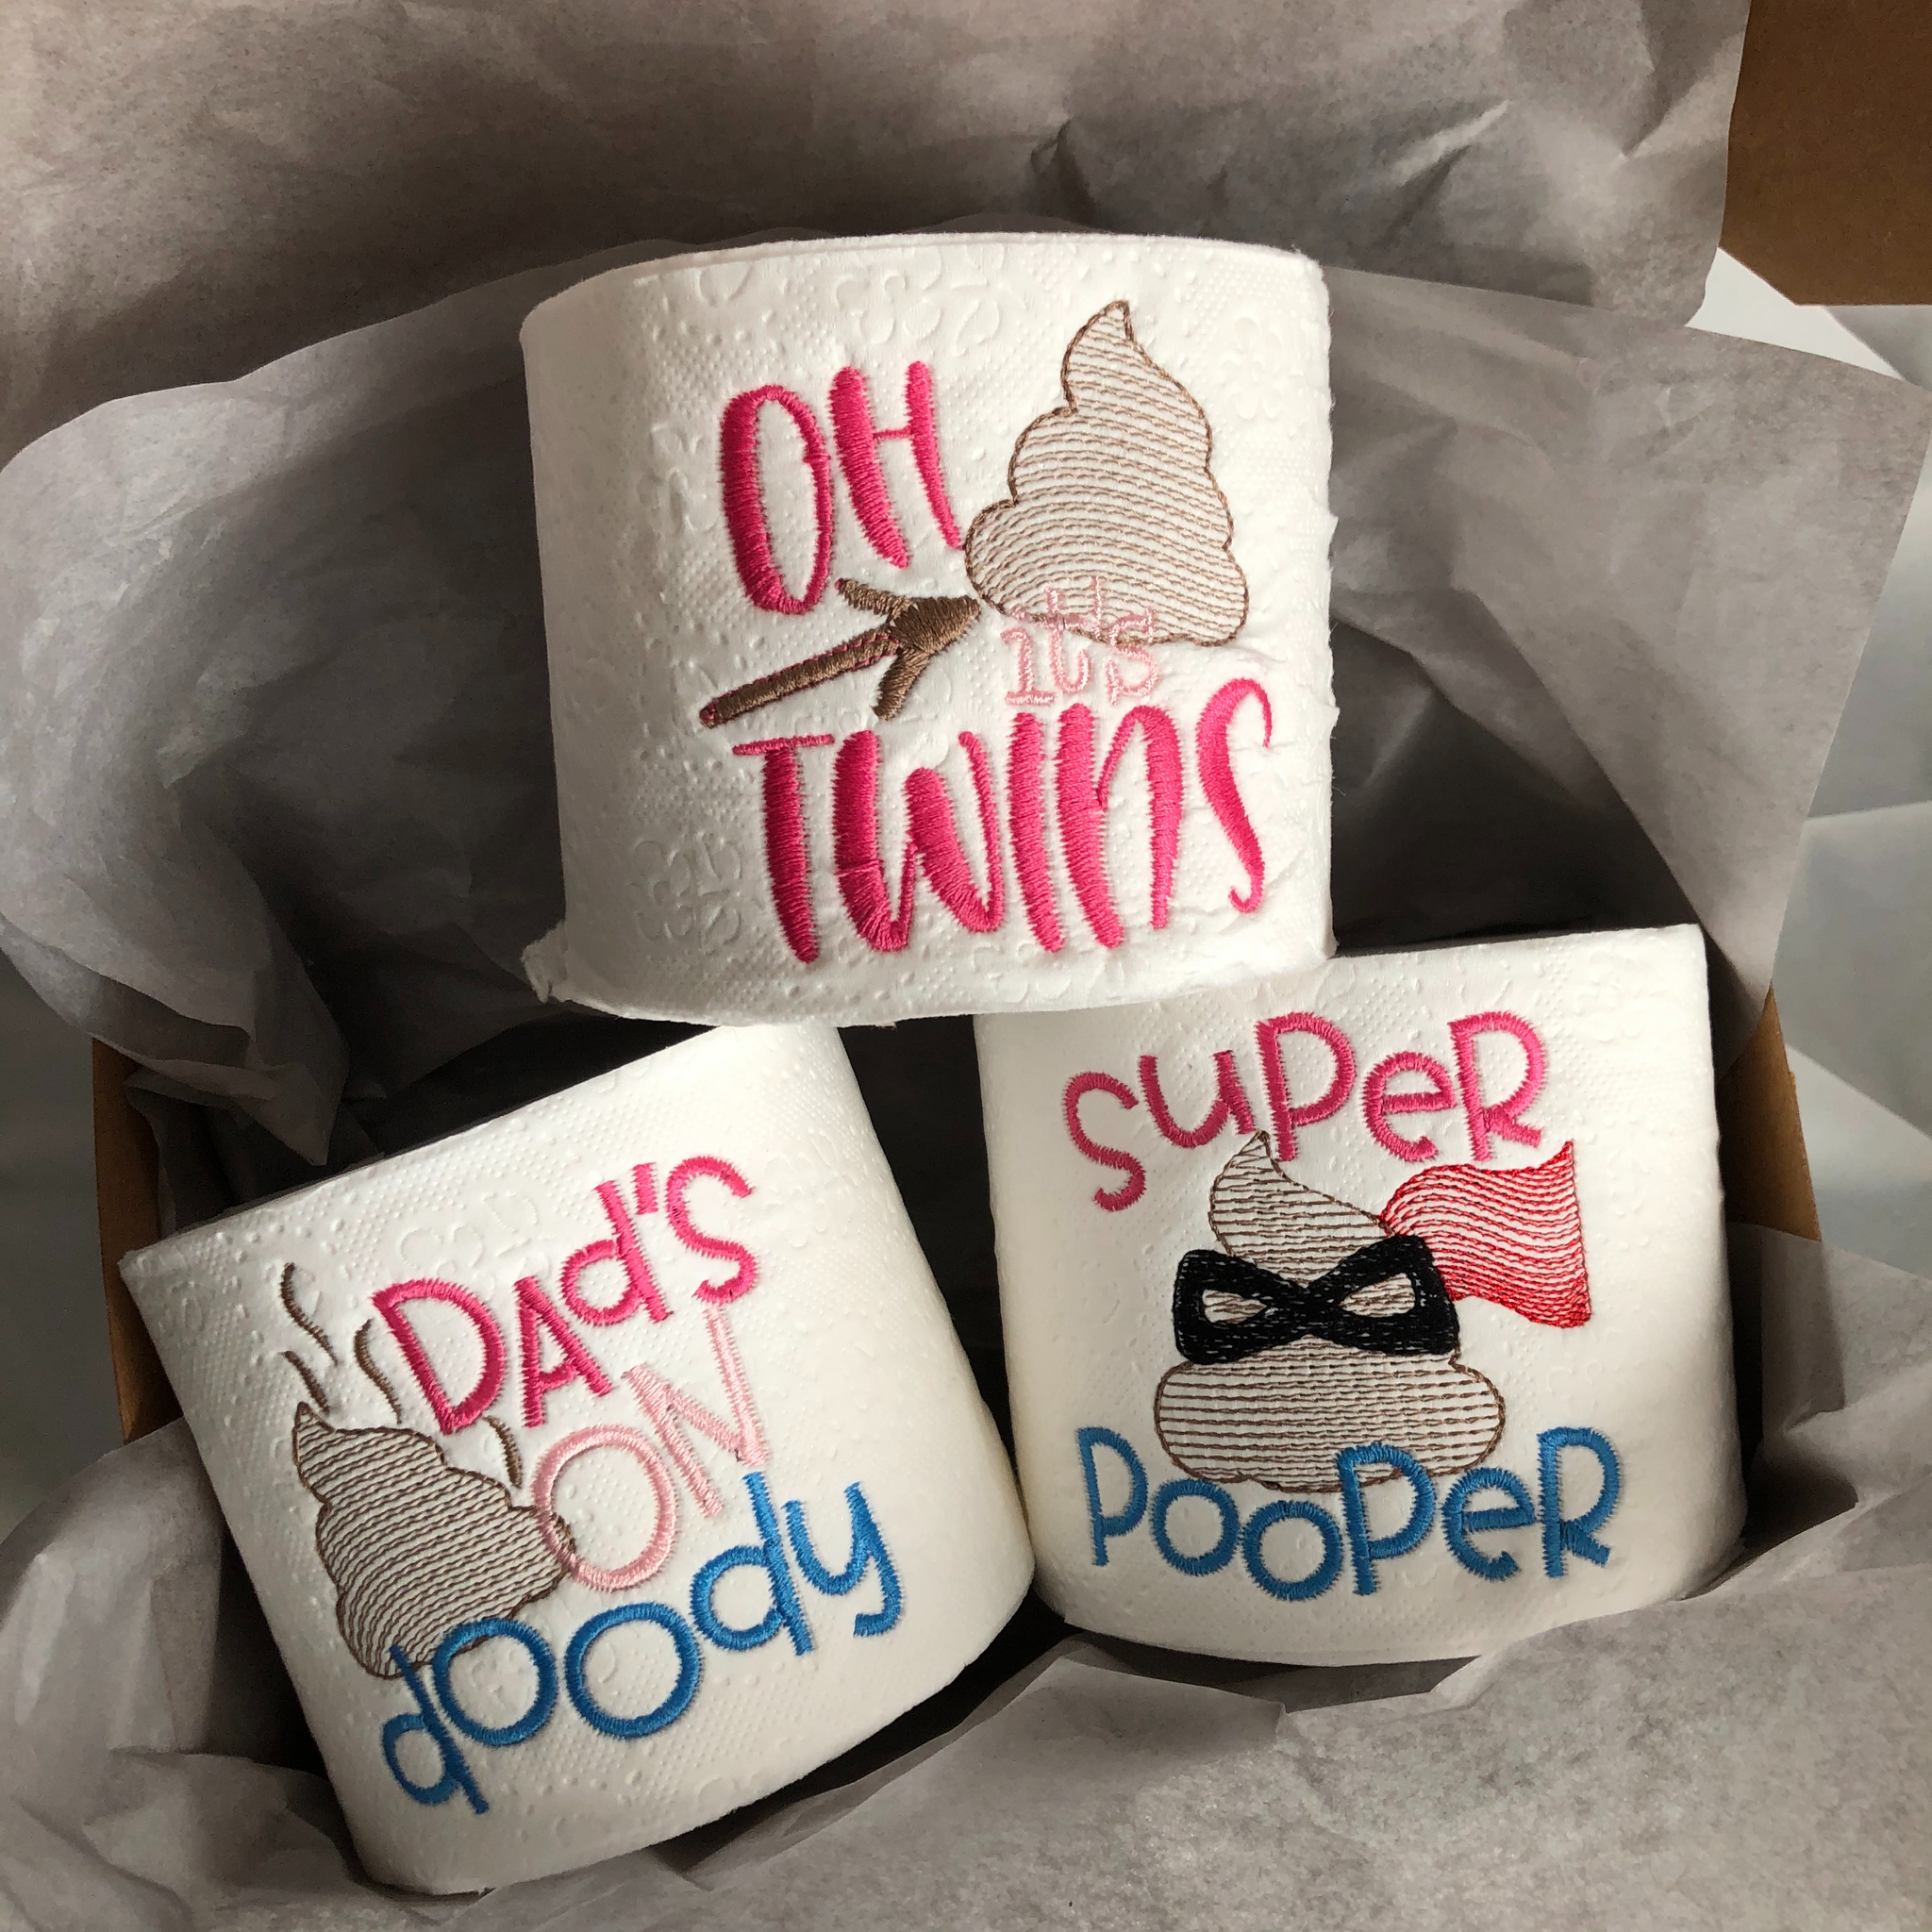 Dad, You're the ! Funny Toilet Paper Dad Gift - The Writing's on the Roll